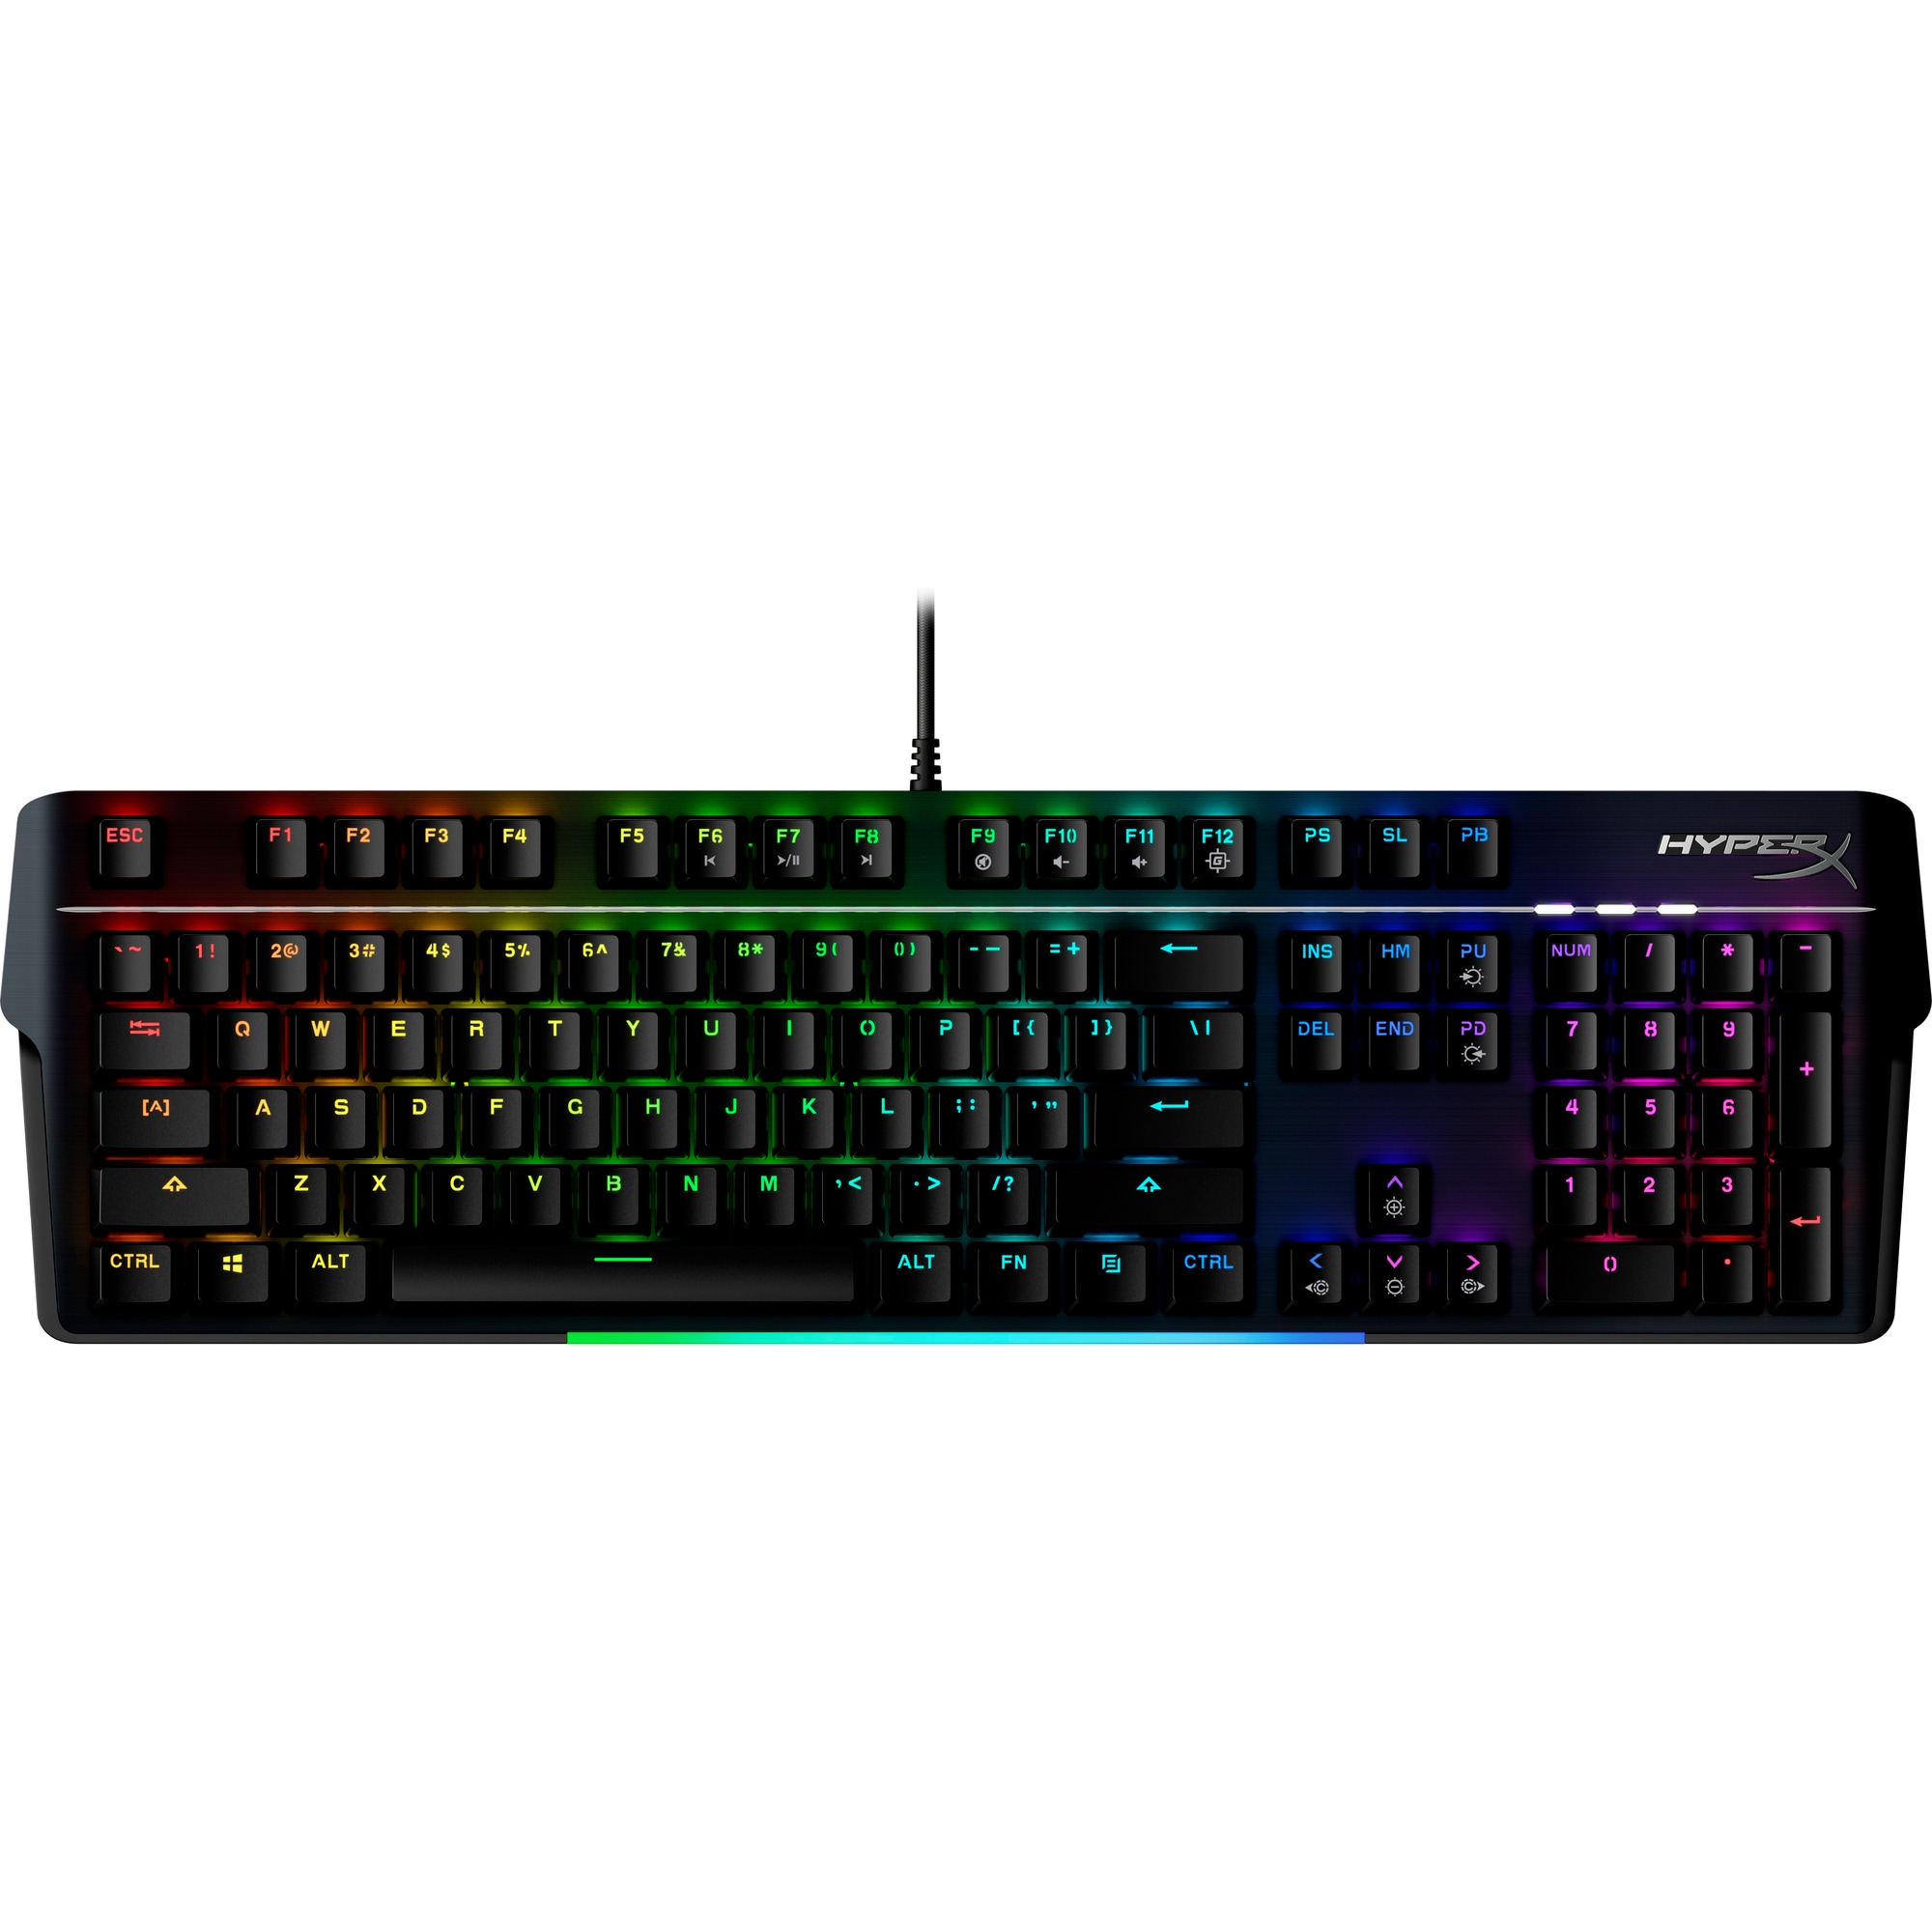 HyperX Alloy MKW100 - Mechnical Gaming Keyboard - Red (US Layout) (HKBM1-R-US/ G)-US - Klávesnice3 